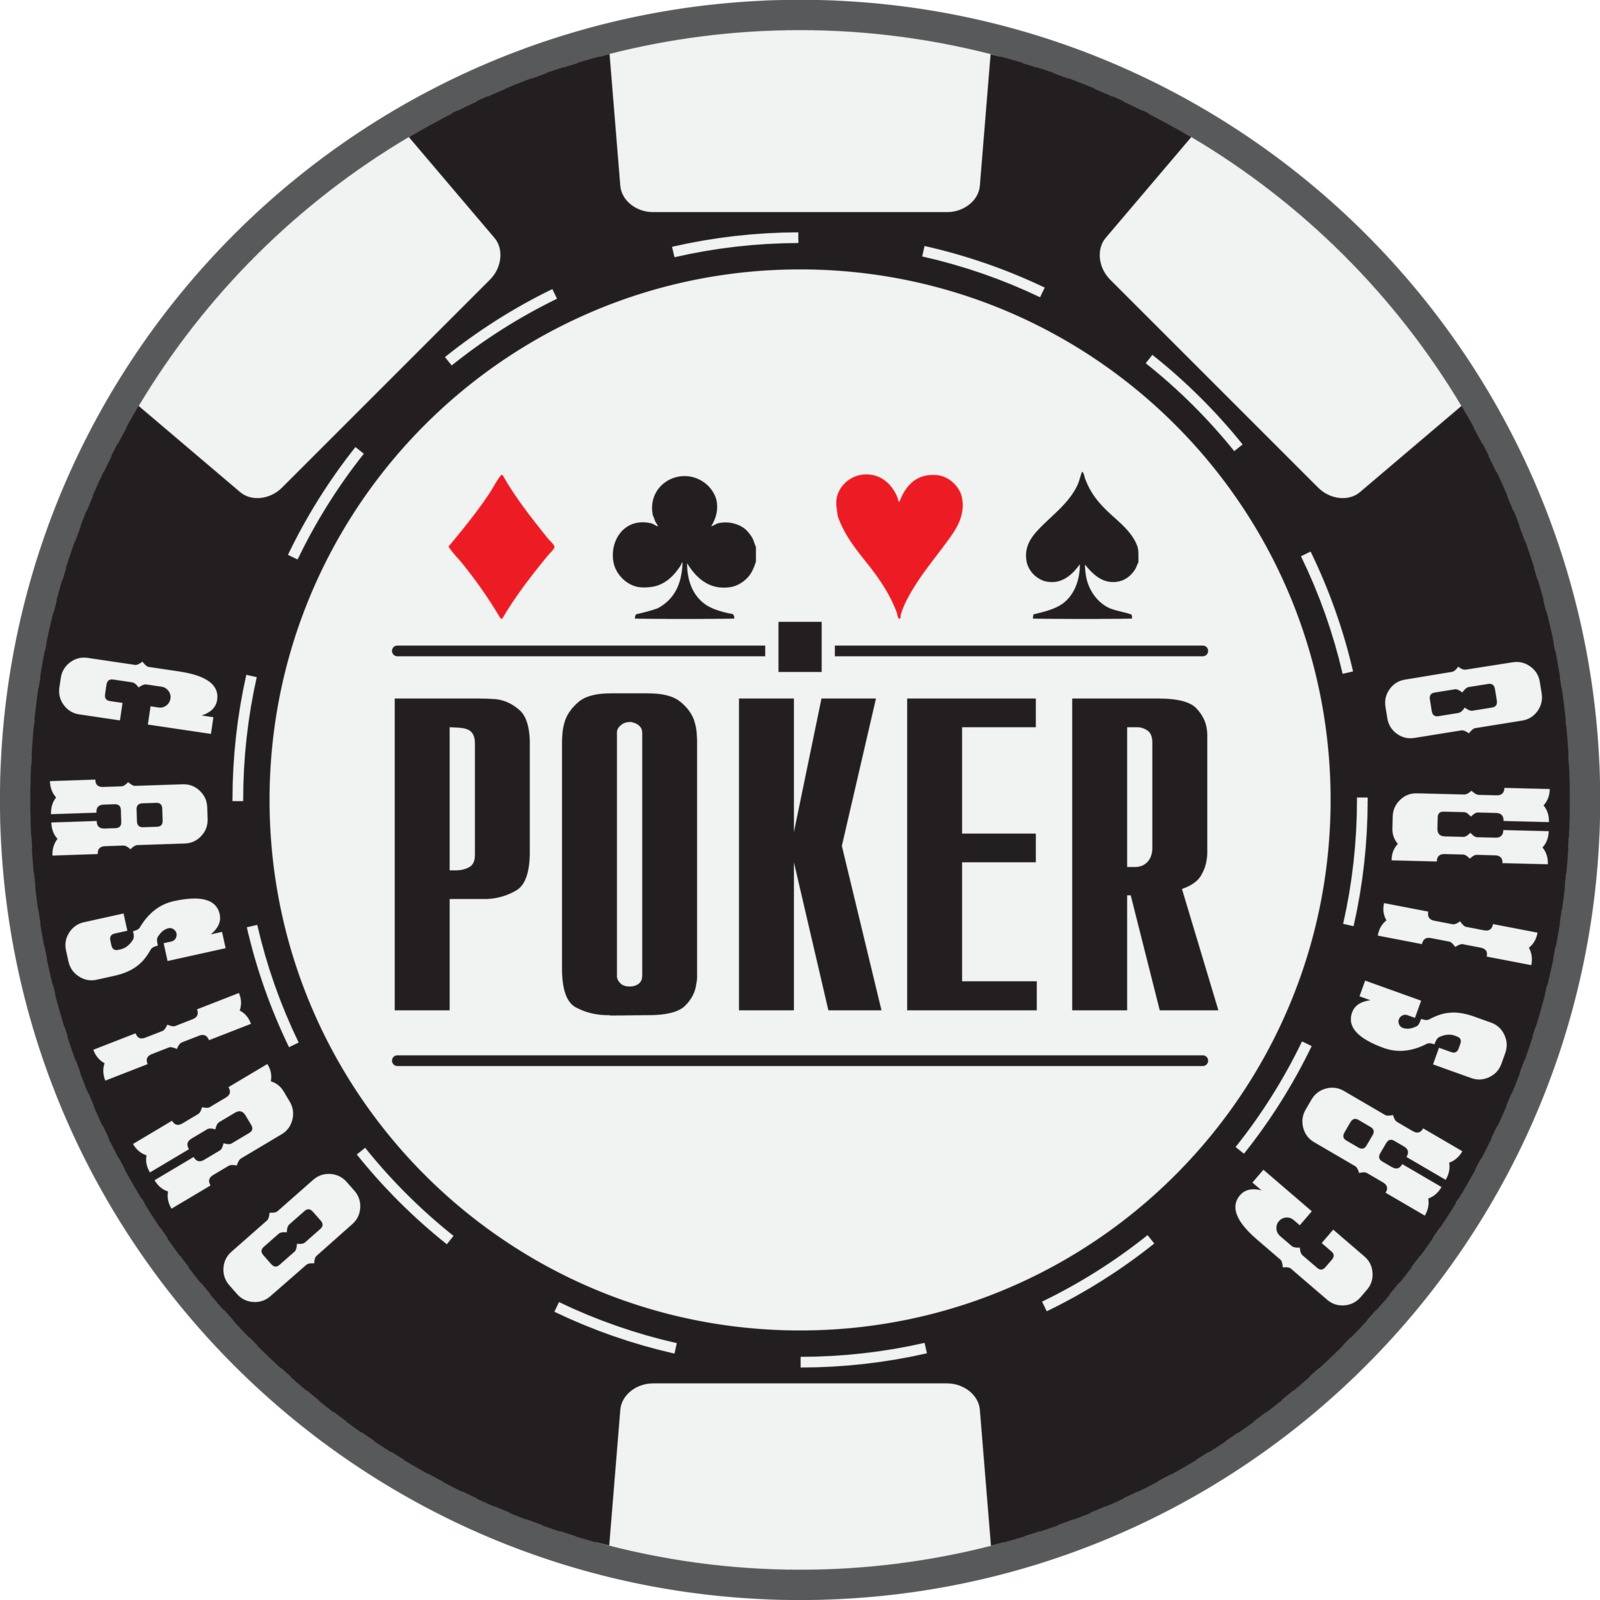 Black casino chips for Poker by VIPDesignUSA